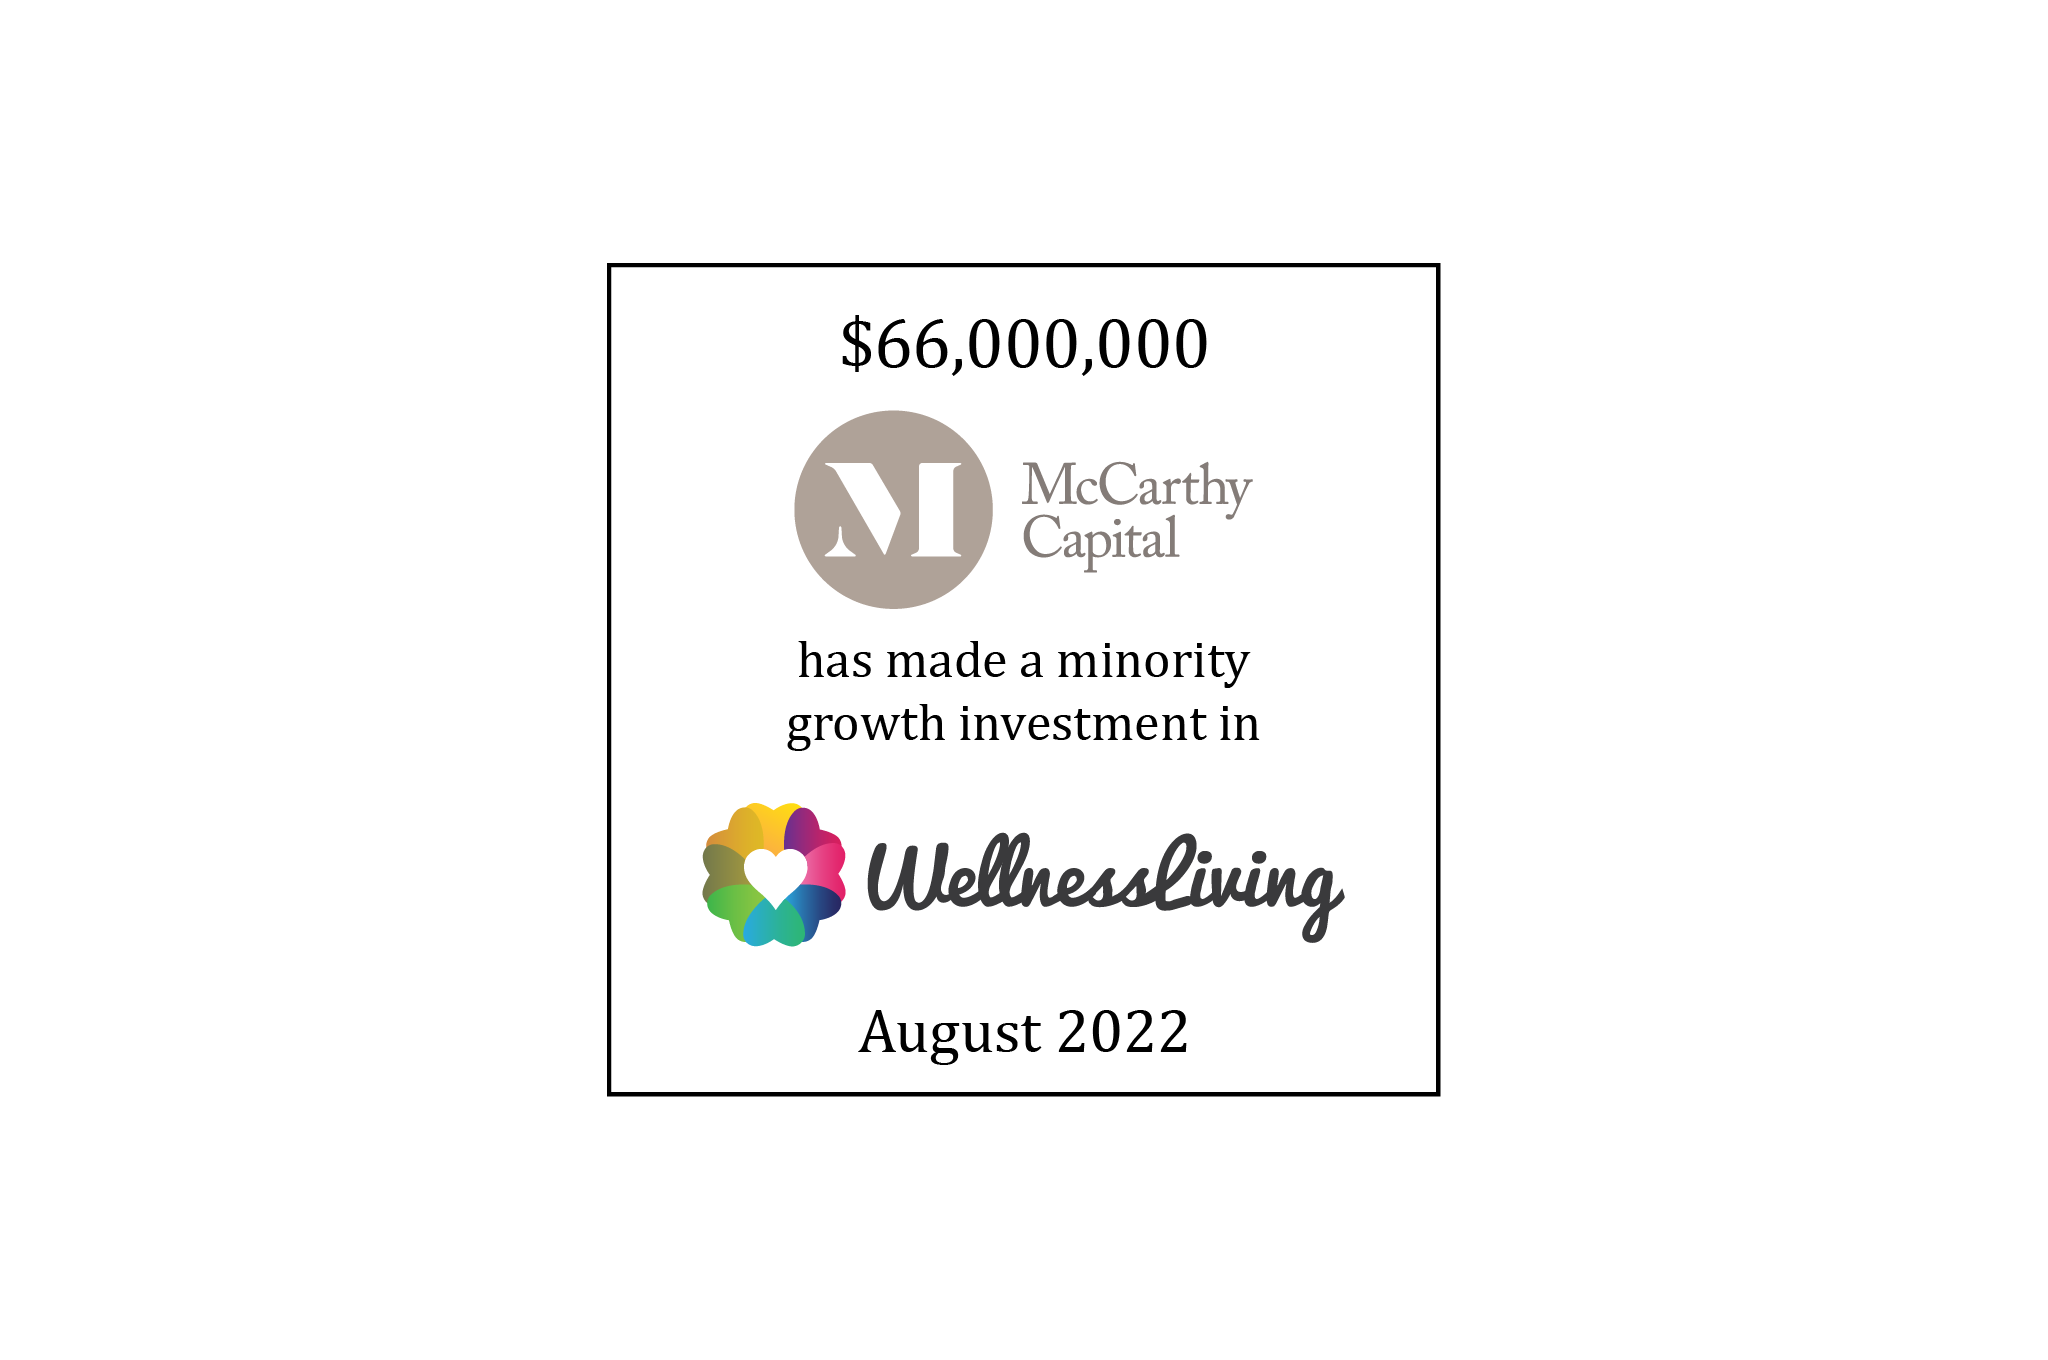 $46,000,000 | McCarthy Capital (logo) has made a Minority Growth Investment in WellnessLiving (logo) | August 2022